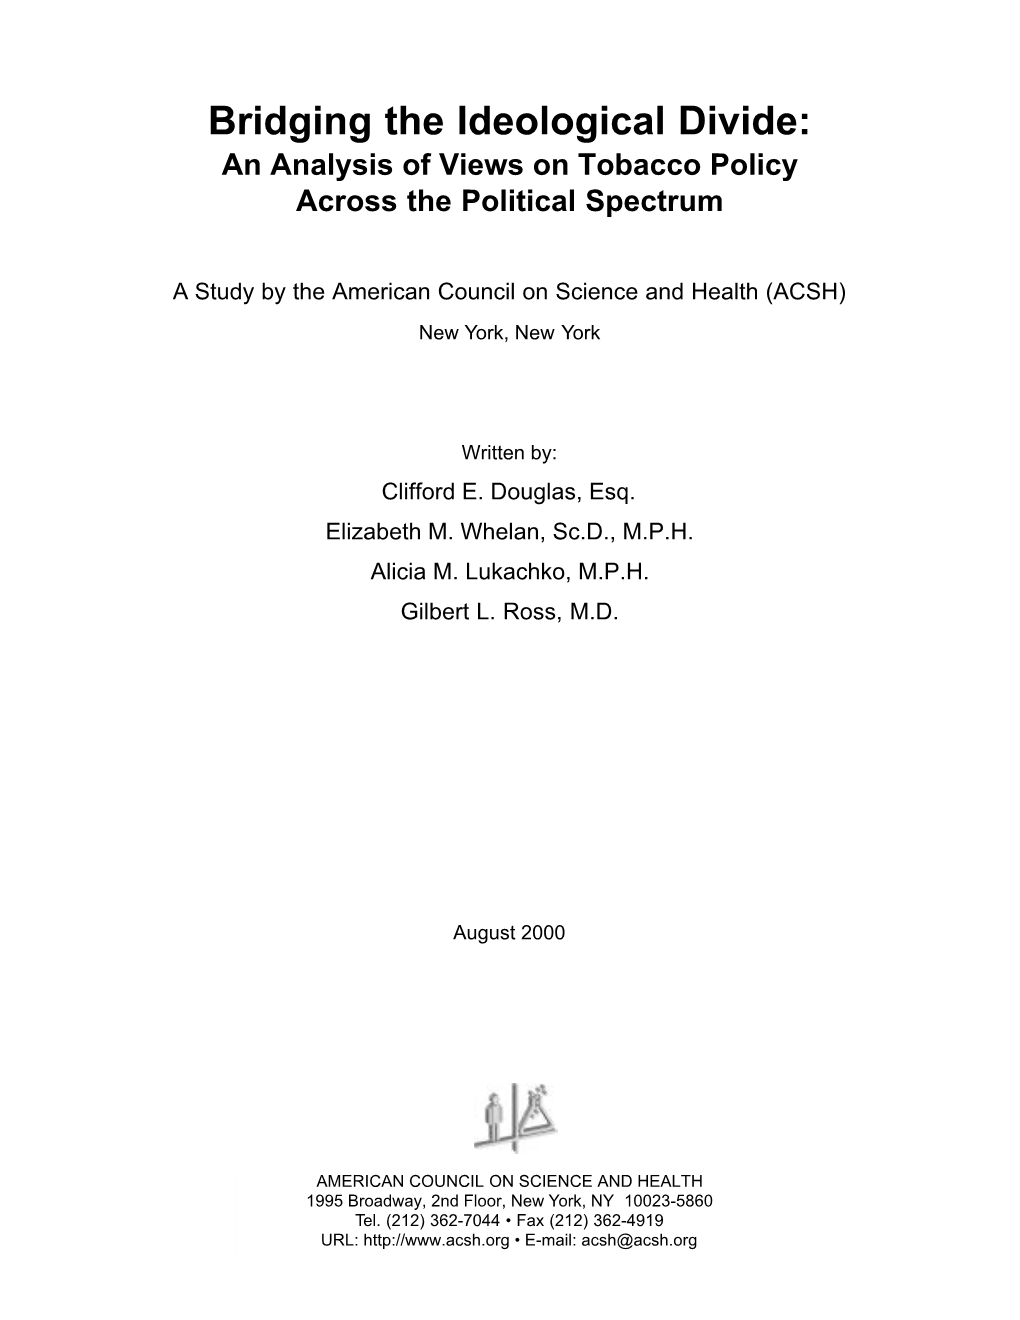 Bridging the Ideological Divide: an Analysis of Views on Tobacco Policy Across the Political Spectrum